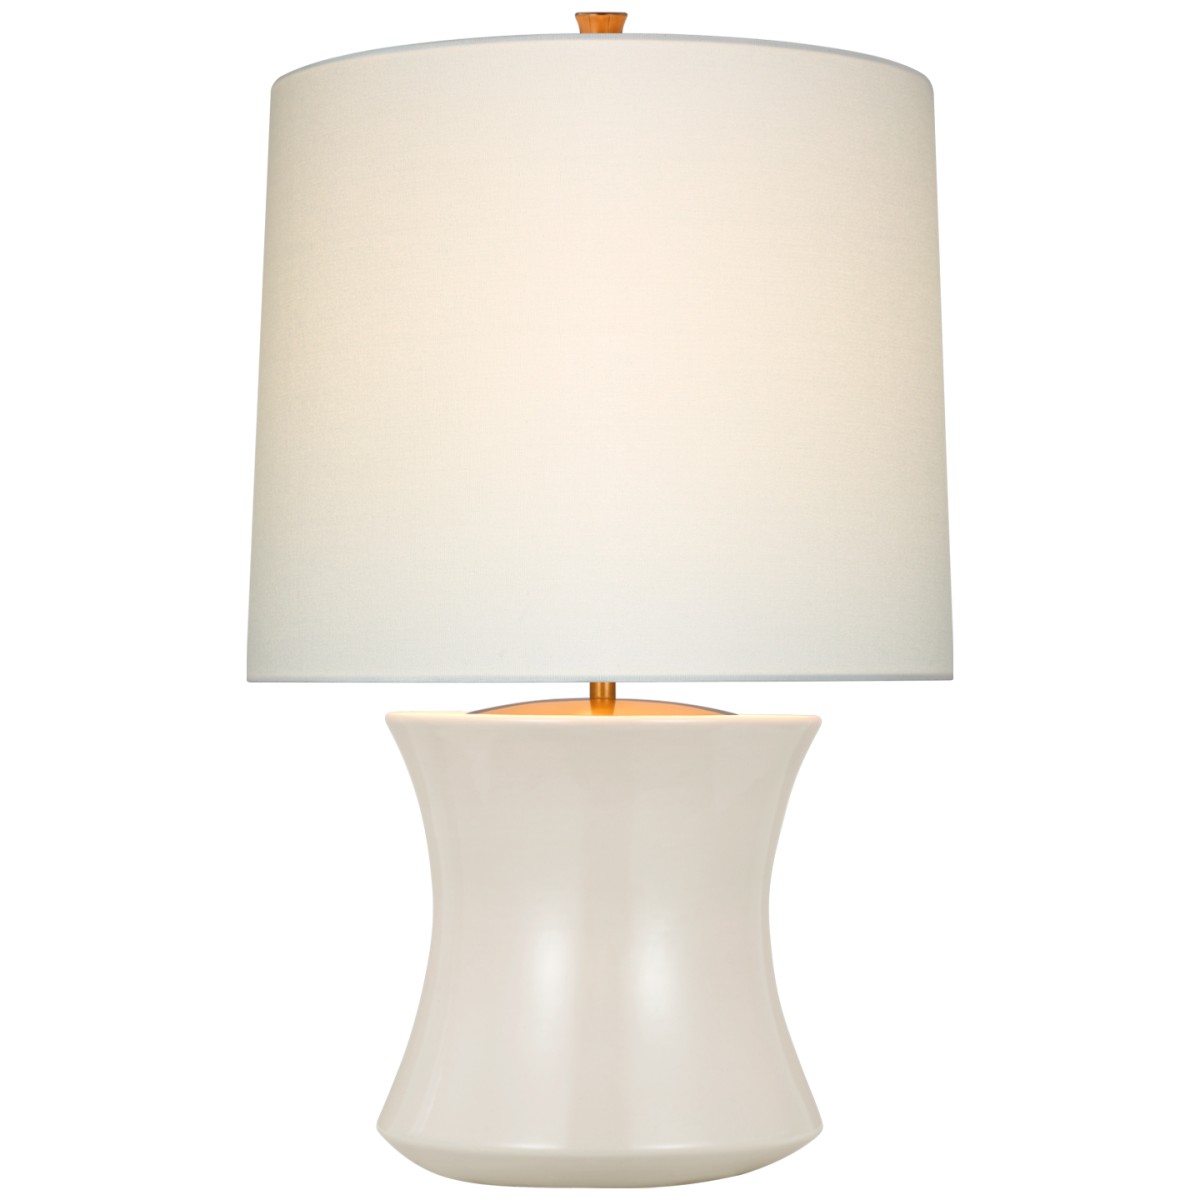 Marella Accent Lamp with Linen Shade